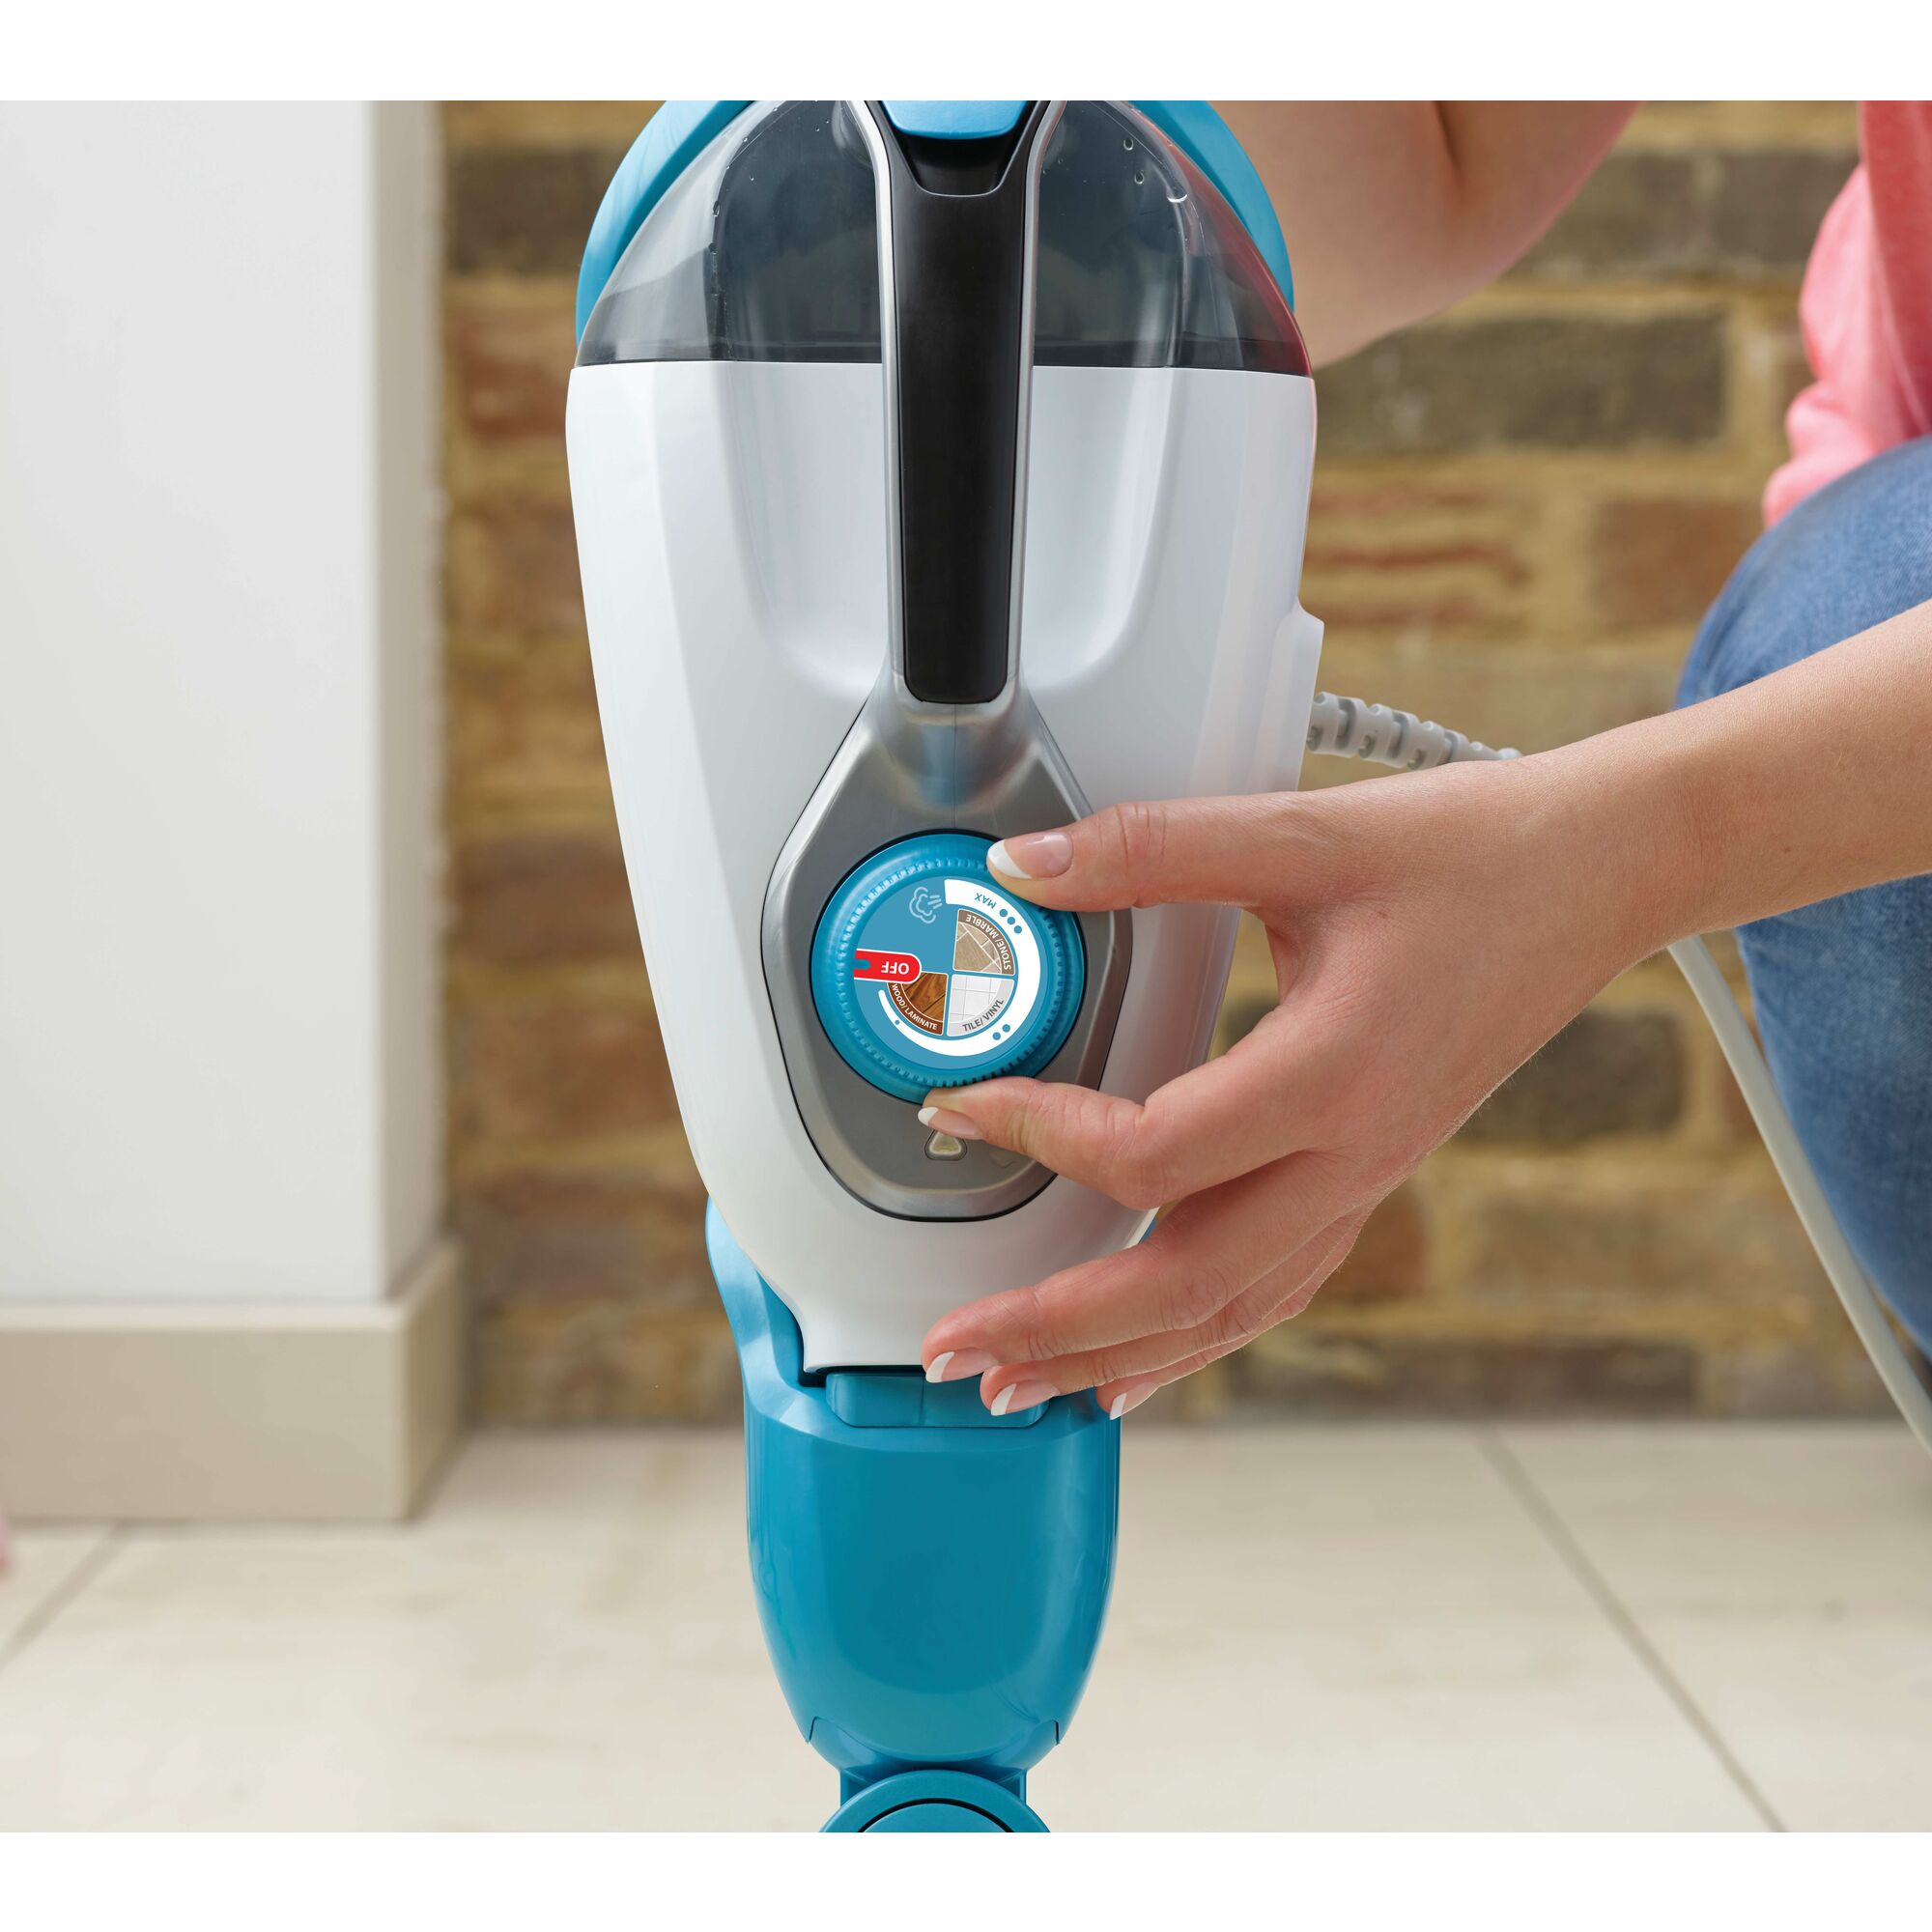 Adjustable steam nozzle feature of 8 in 1 complete steam cleaning system.